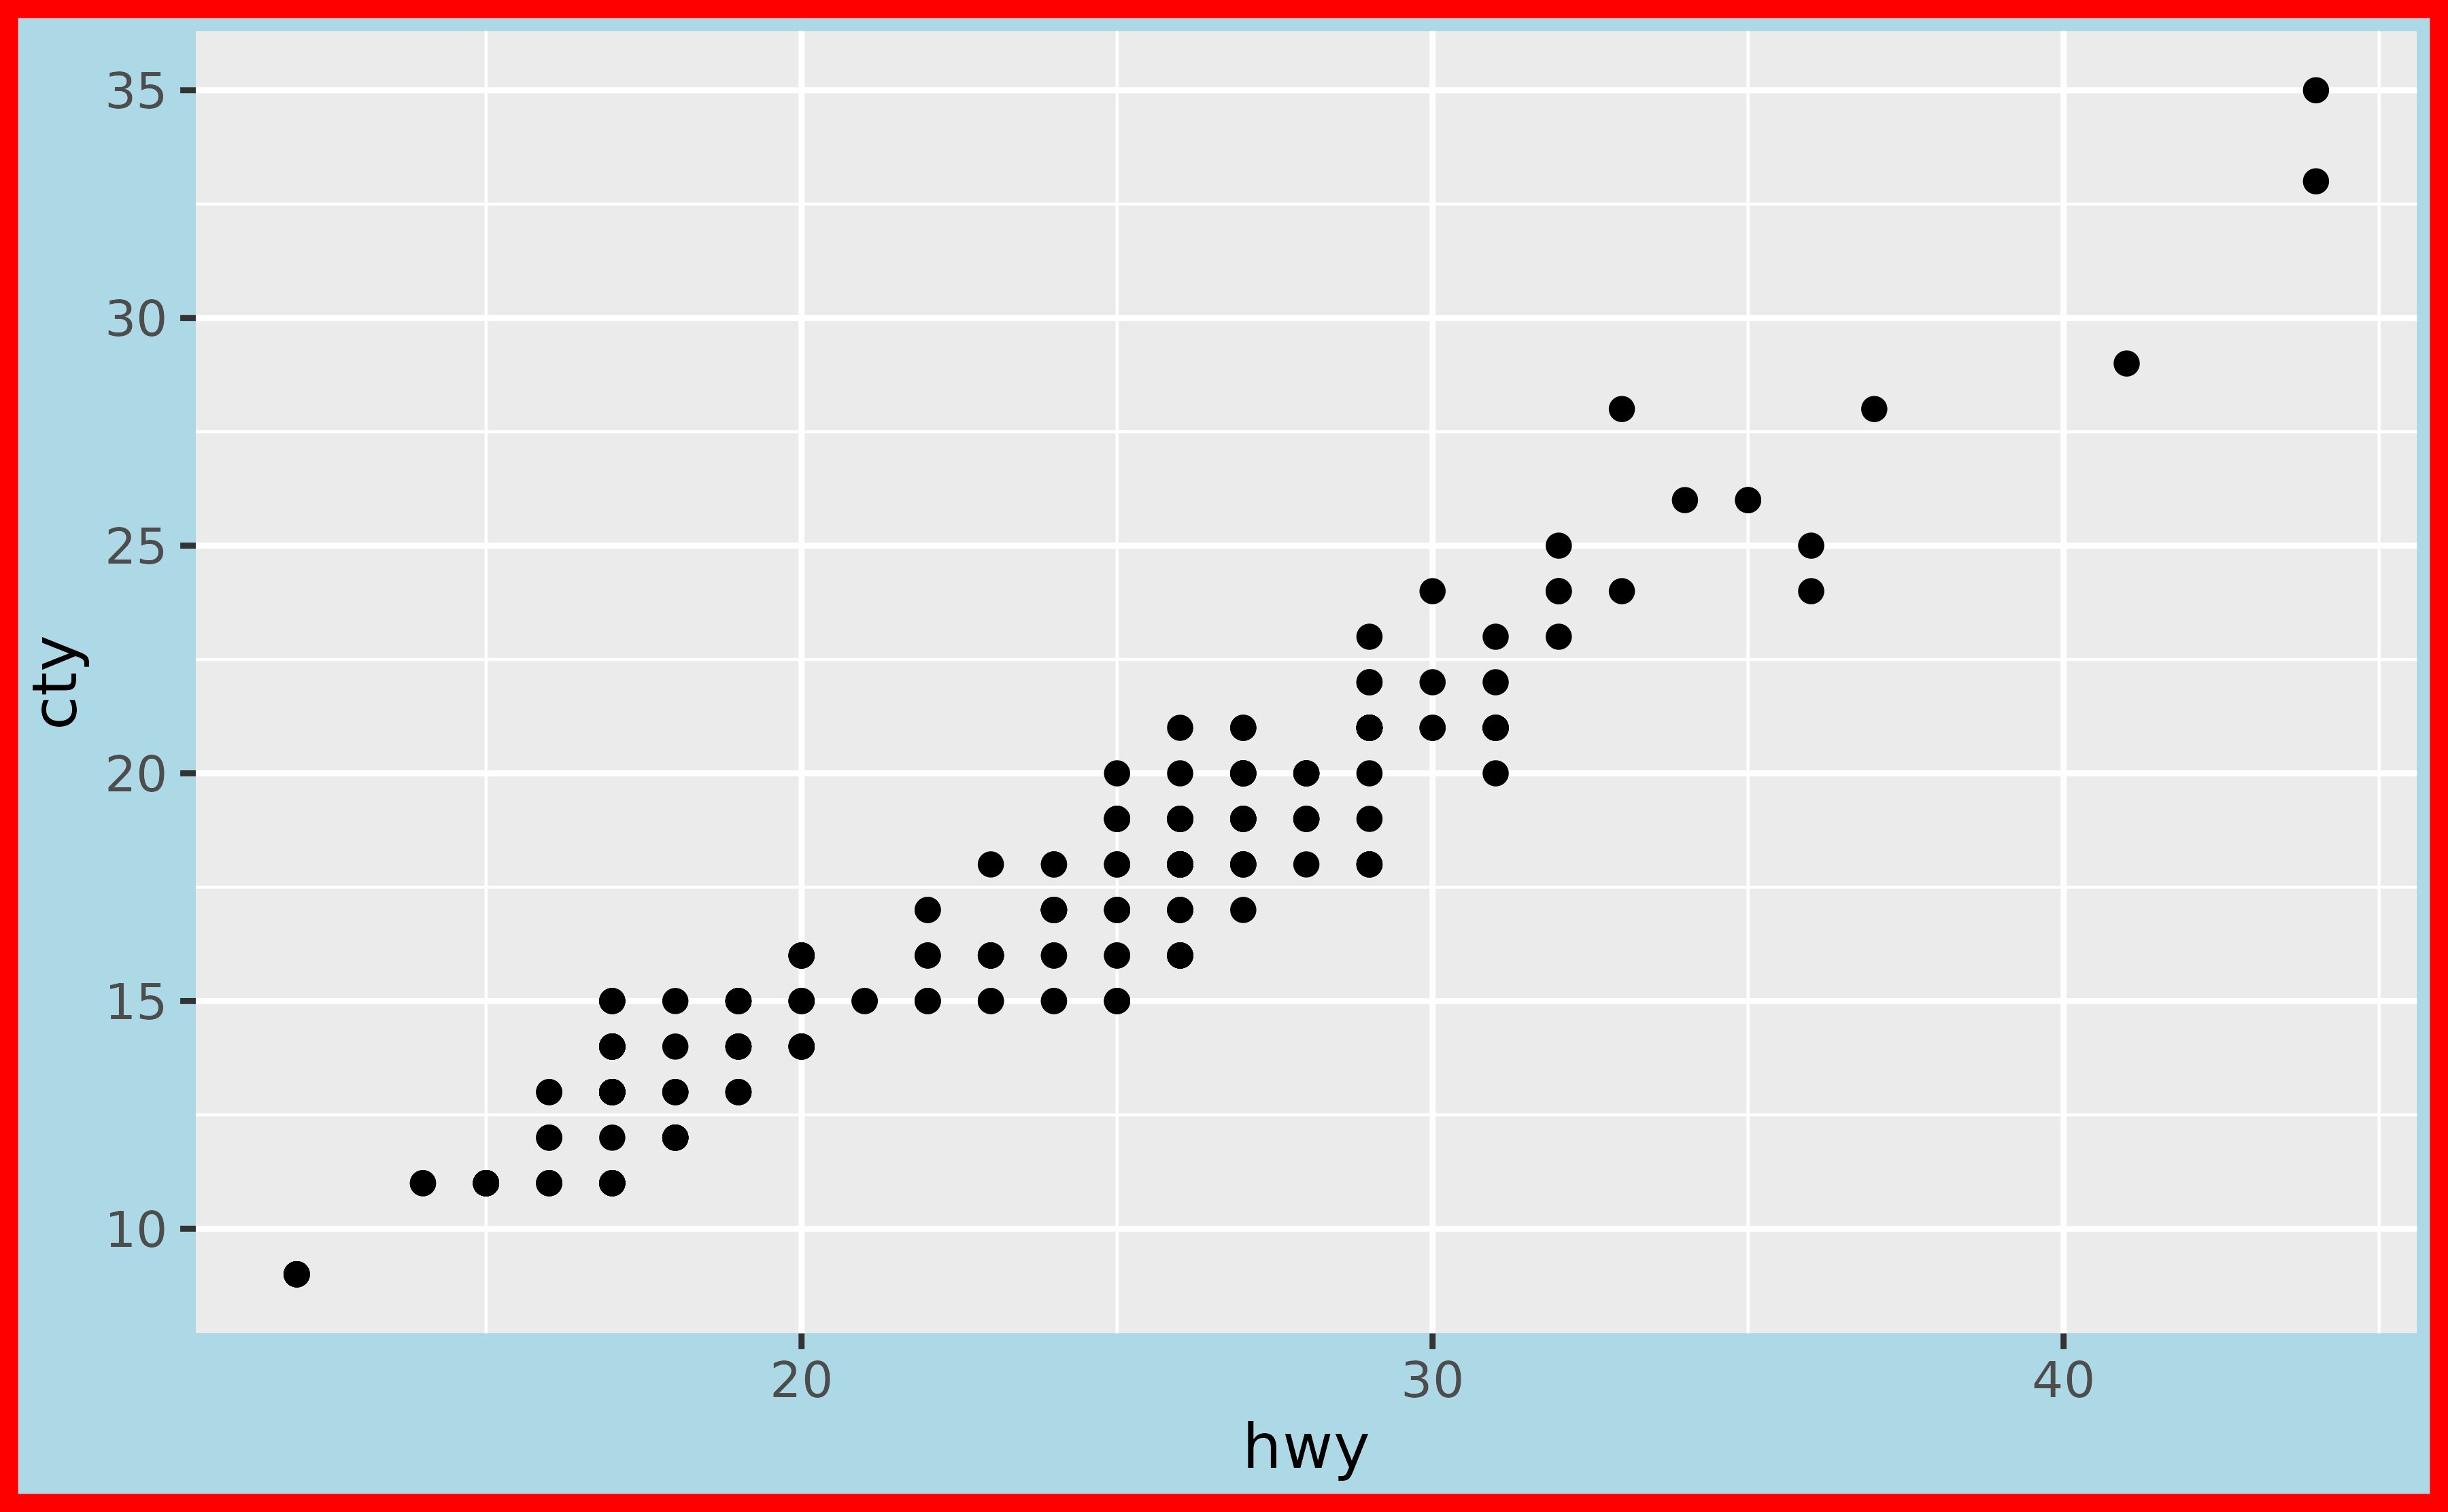 A scatter plot showing the highway miles per gallon on the x-axis and city miles per gallon on the y-axis. The plot background is light blue and is outlined in red with a thick stroke. The panel background remains grey.